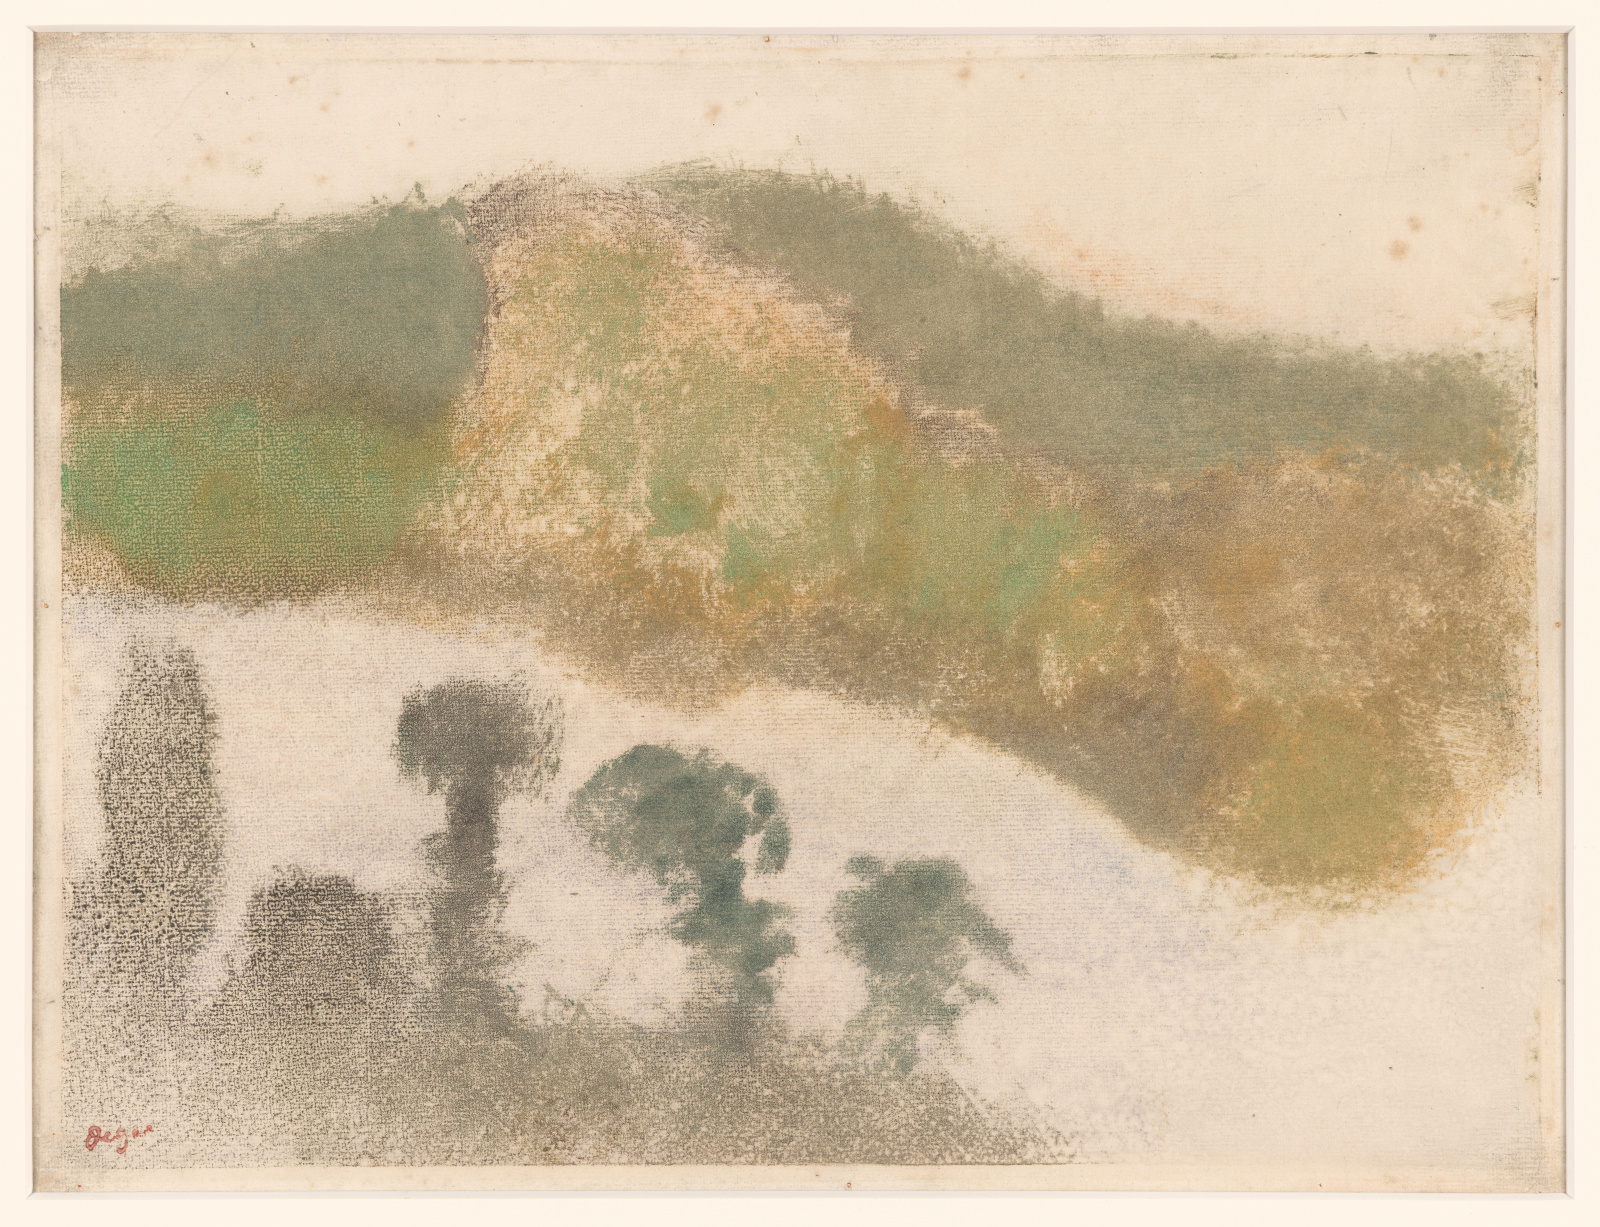 EDGAR DEGAS (1834–1917)
Montagnes et vallon (Mountains and Valley), 1890
39 x 49 cm
Monotype in oil, worked over with pastel
Private collection, Basel